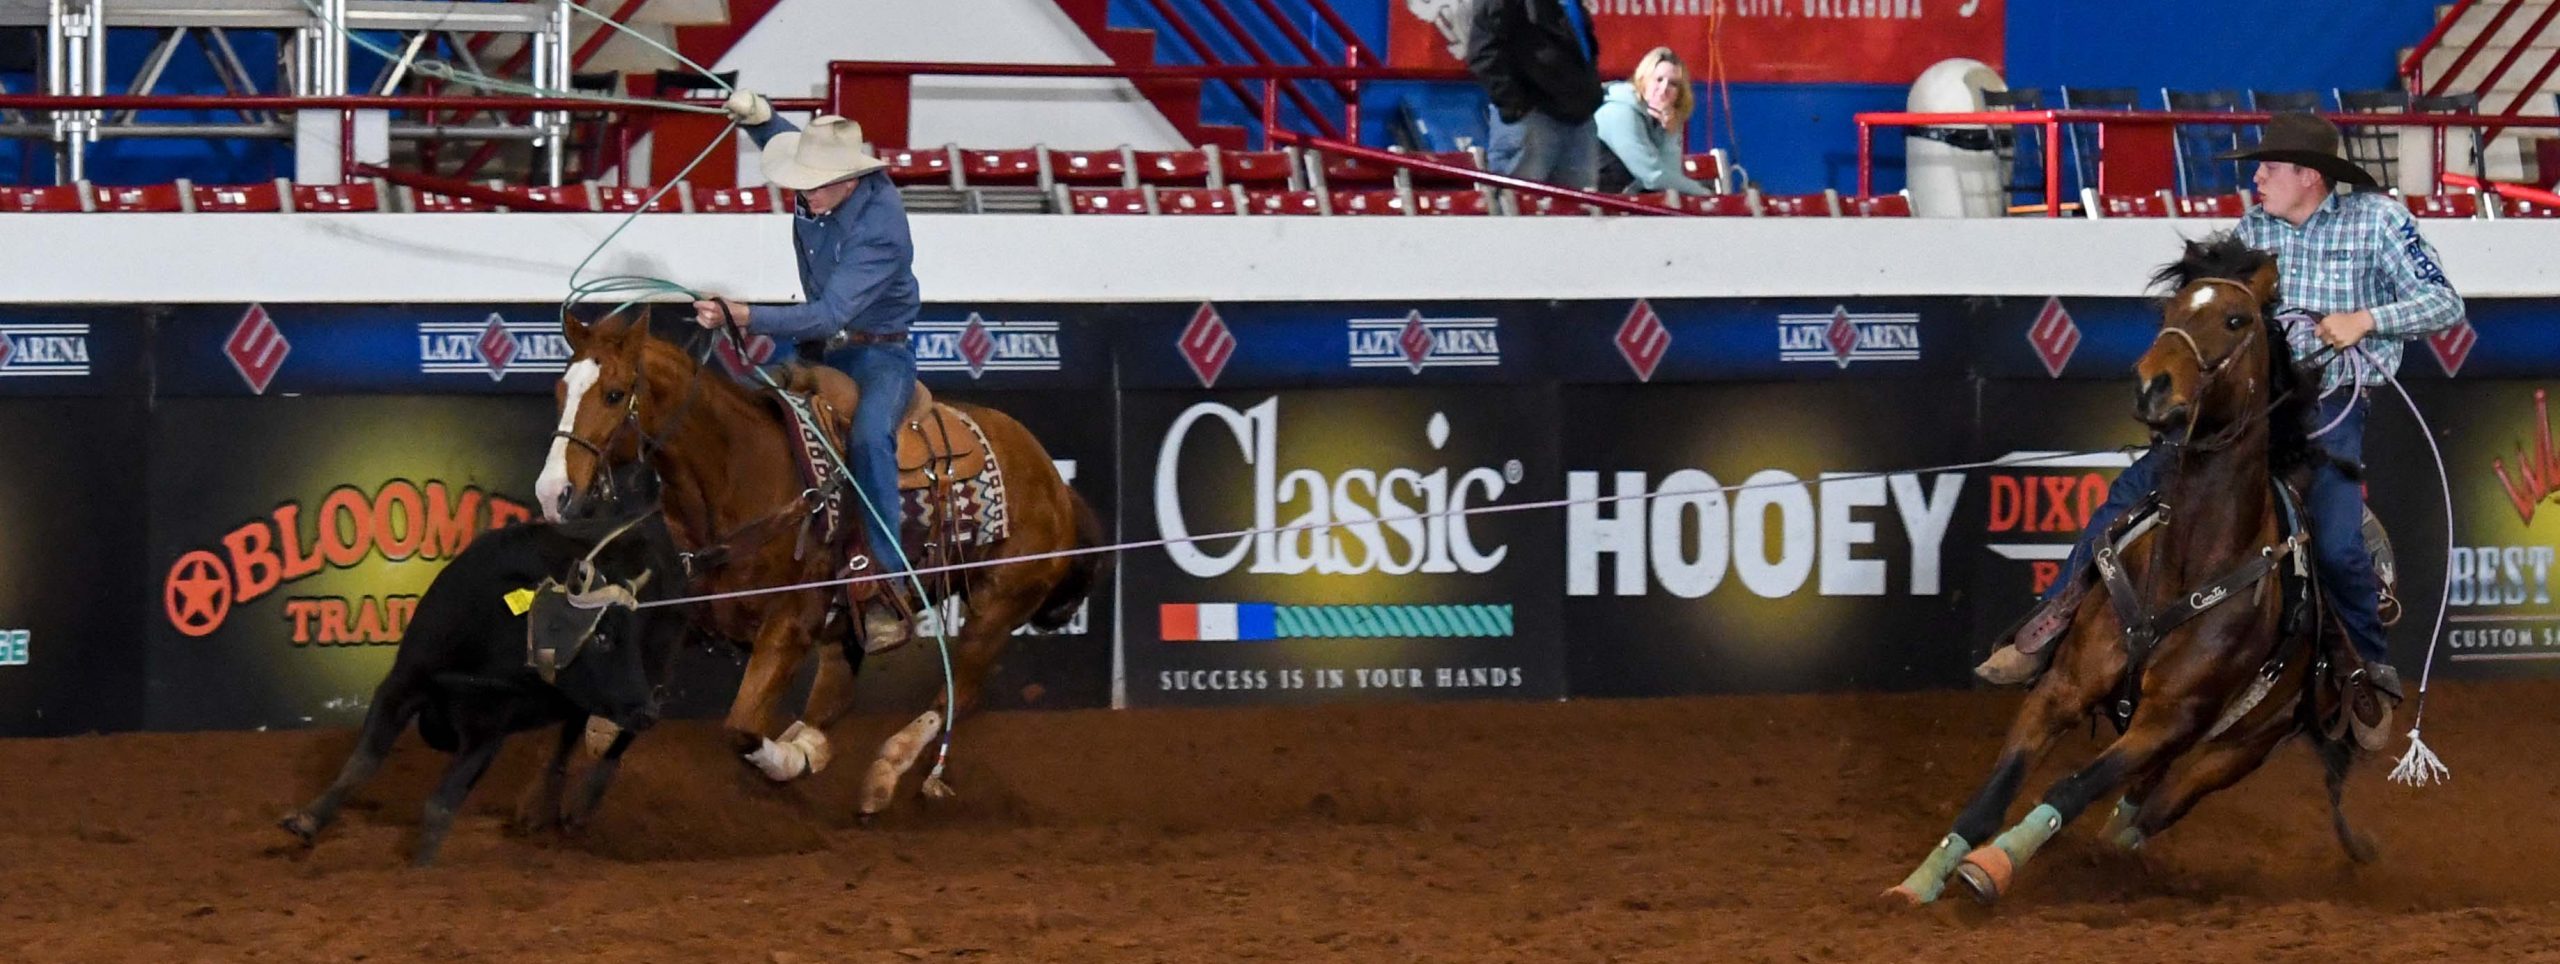 OIL CAPITAL CLASSIC TEAM ROPING SET TO TAKE PLACE DURING BFI WEEK